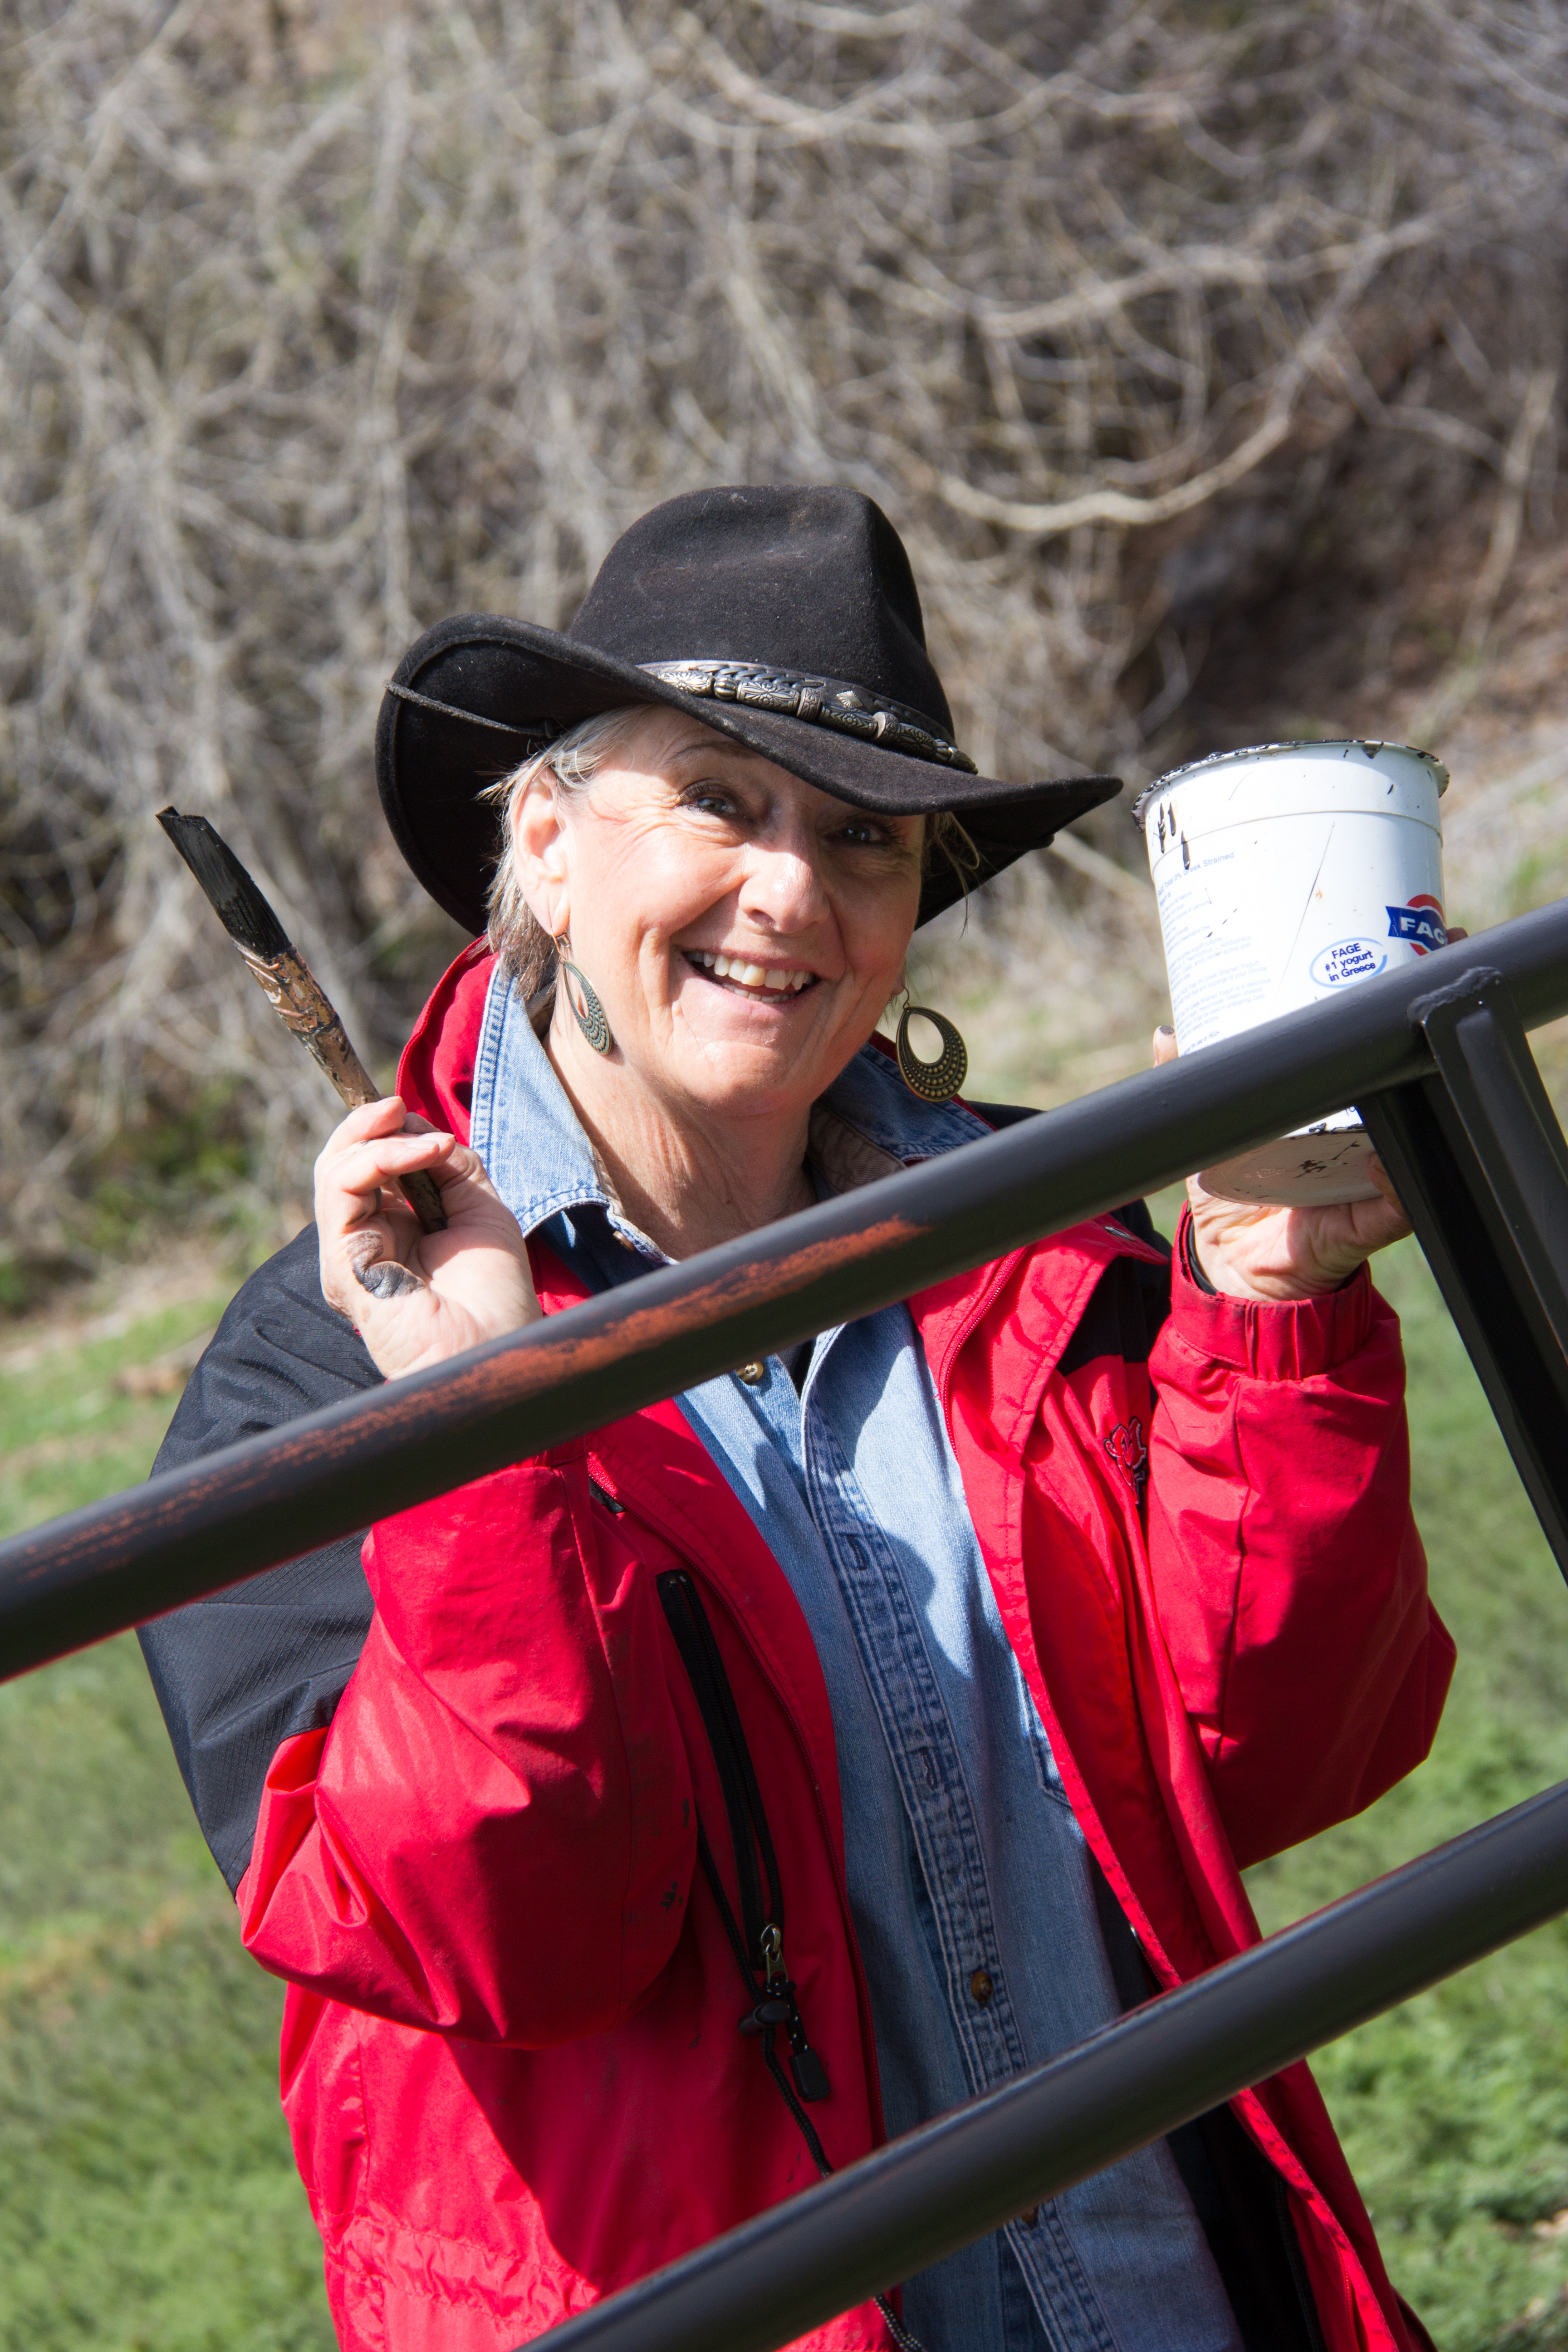 A smiling woman in a red coat and black cowboy hat holds a paintbrush and container of paint